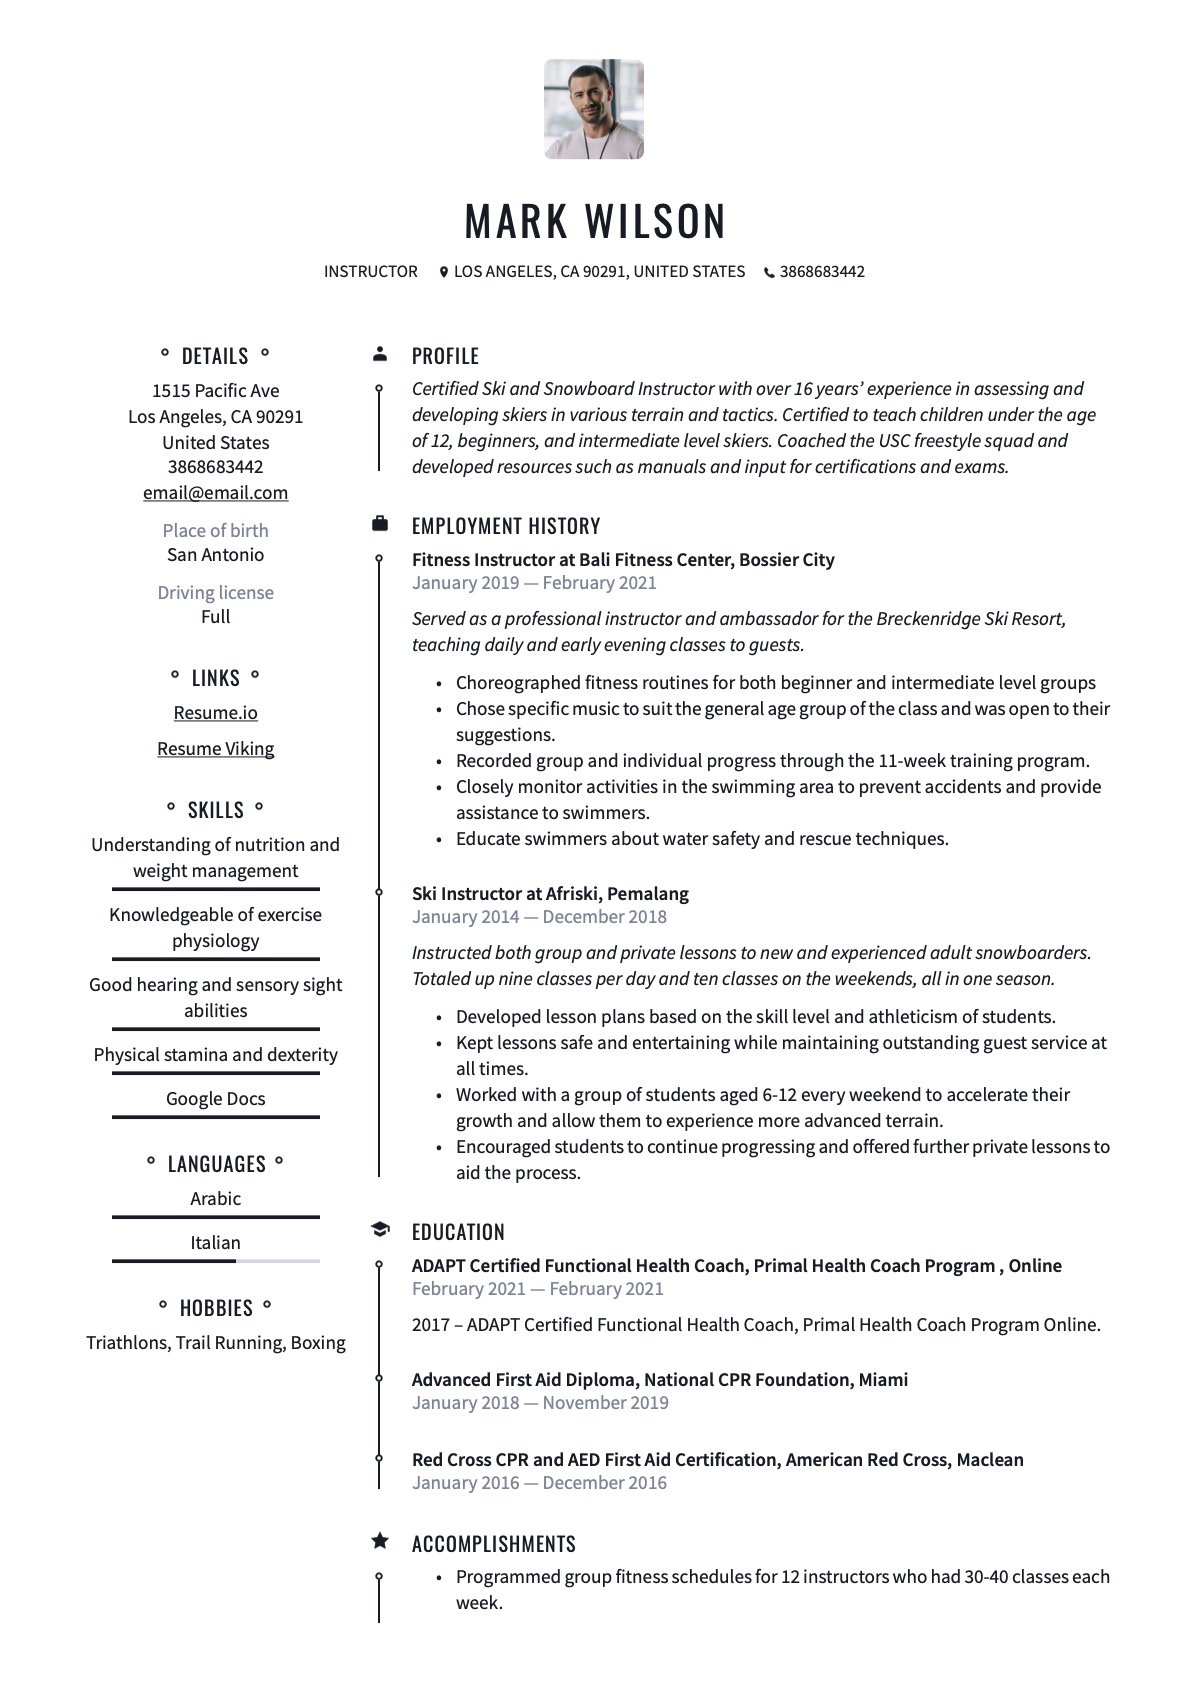 Example Resume Instructor-2